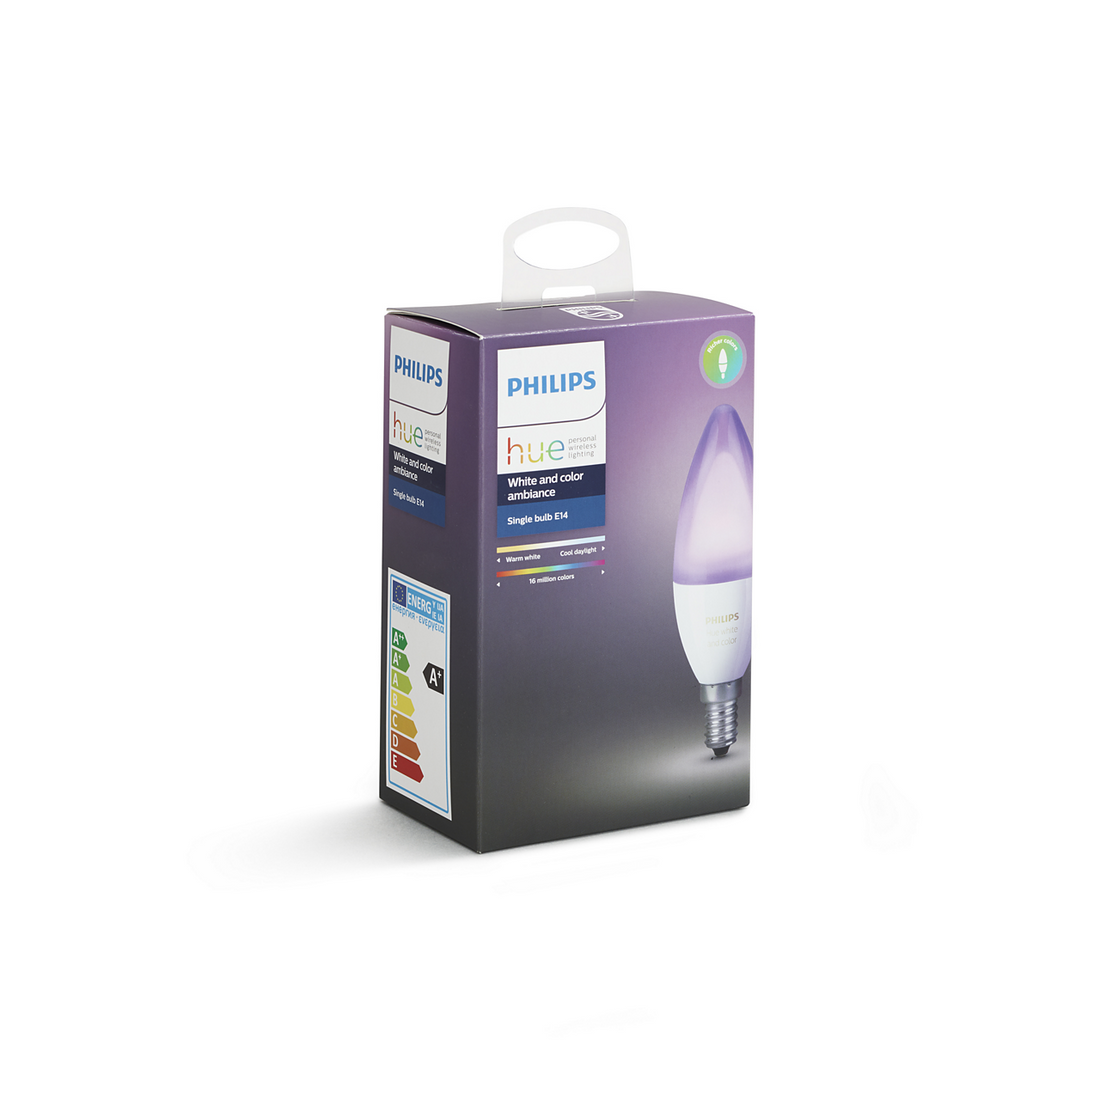 Philips Hue White and Colour Candles (E14)